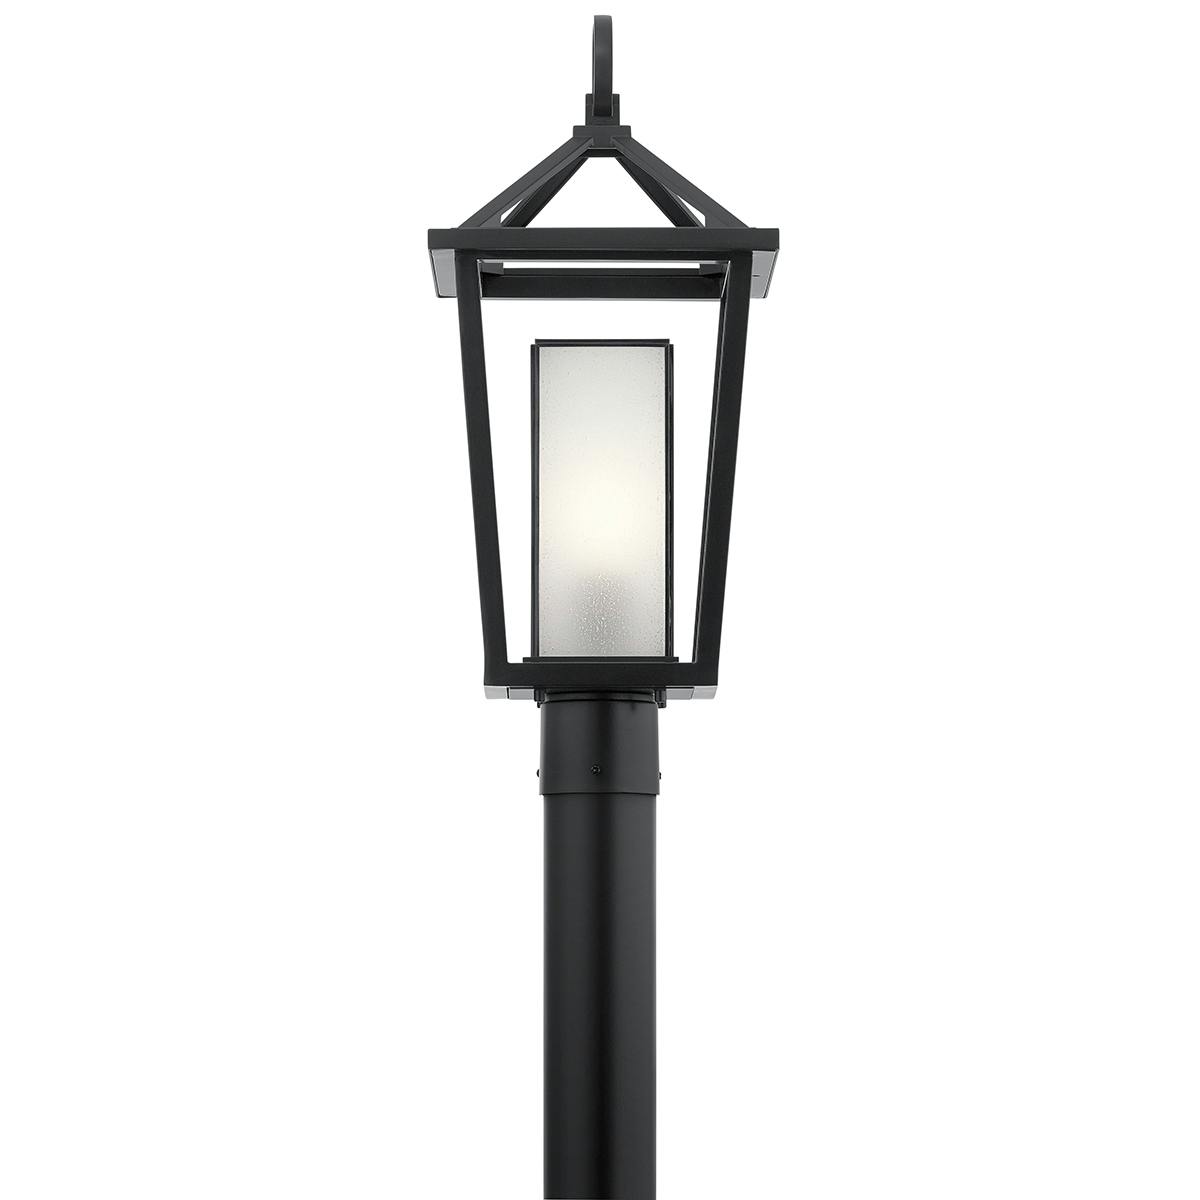 Profile view of the Pai™21.75" 1 Light Post Light Black on a white background